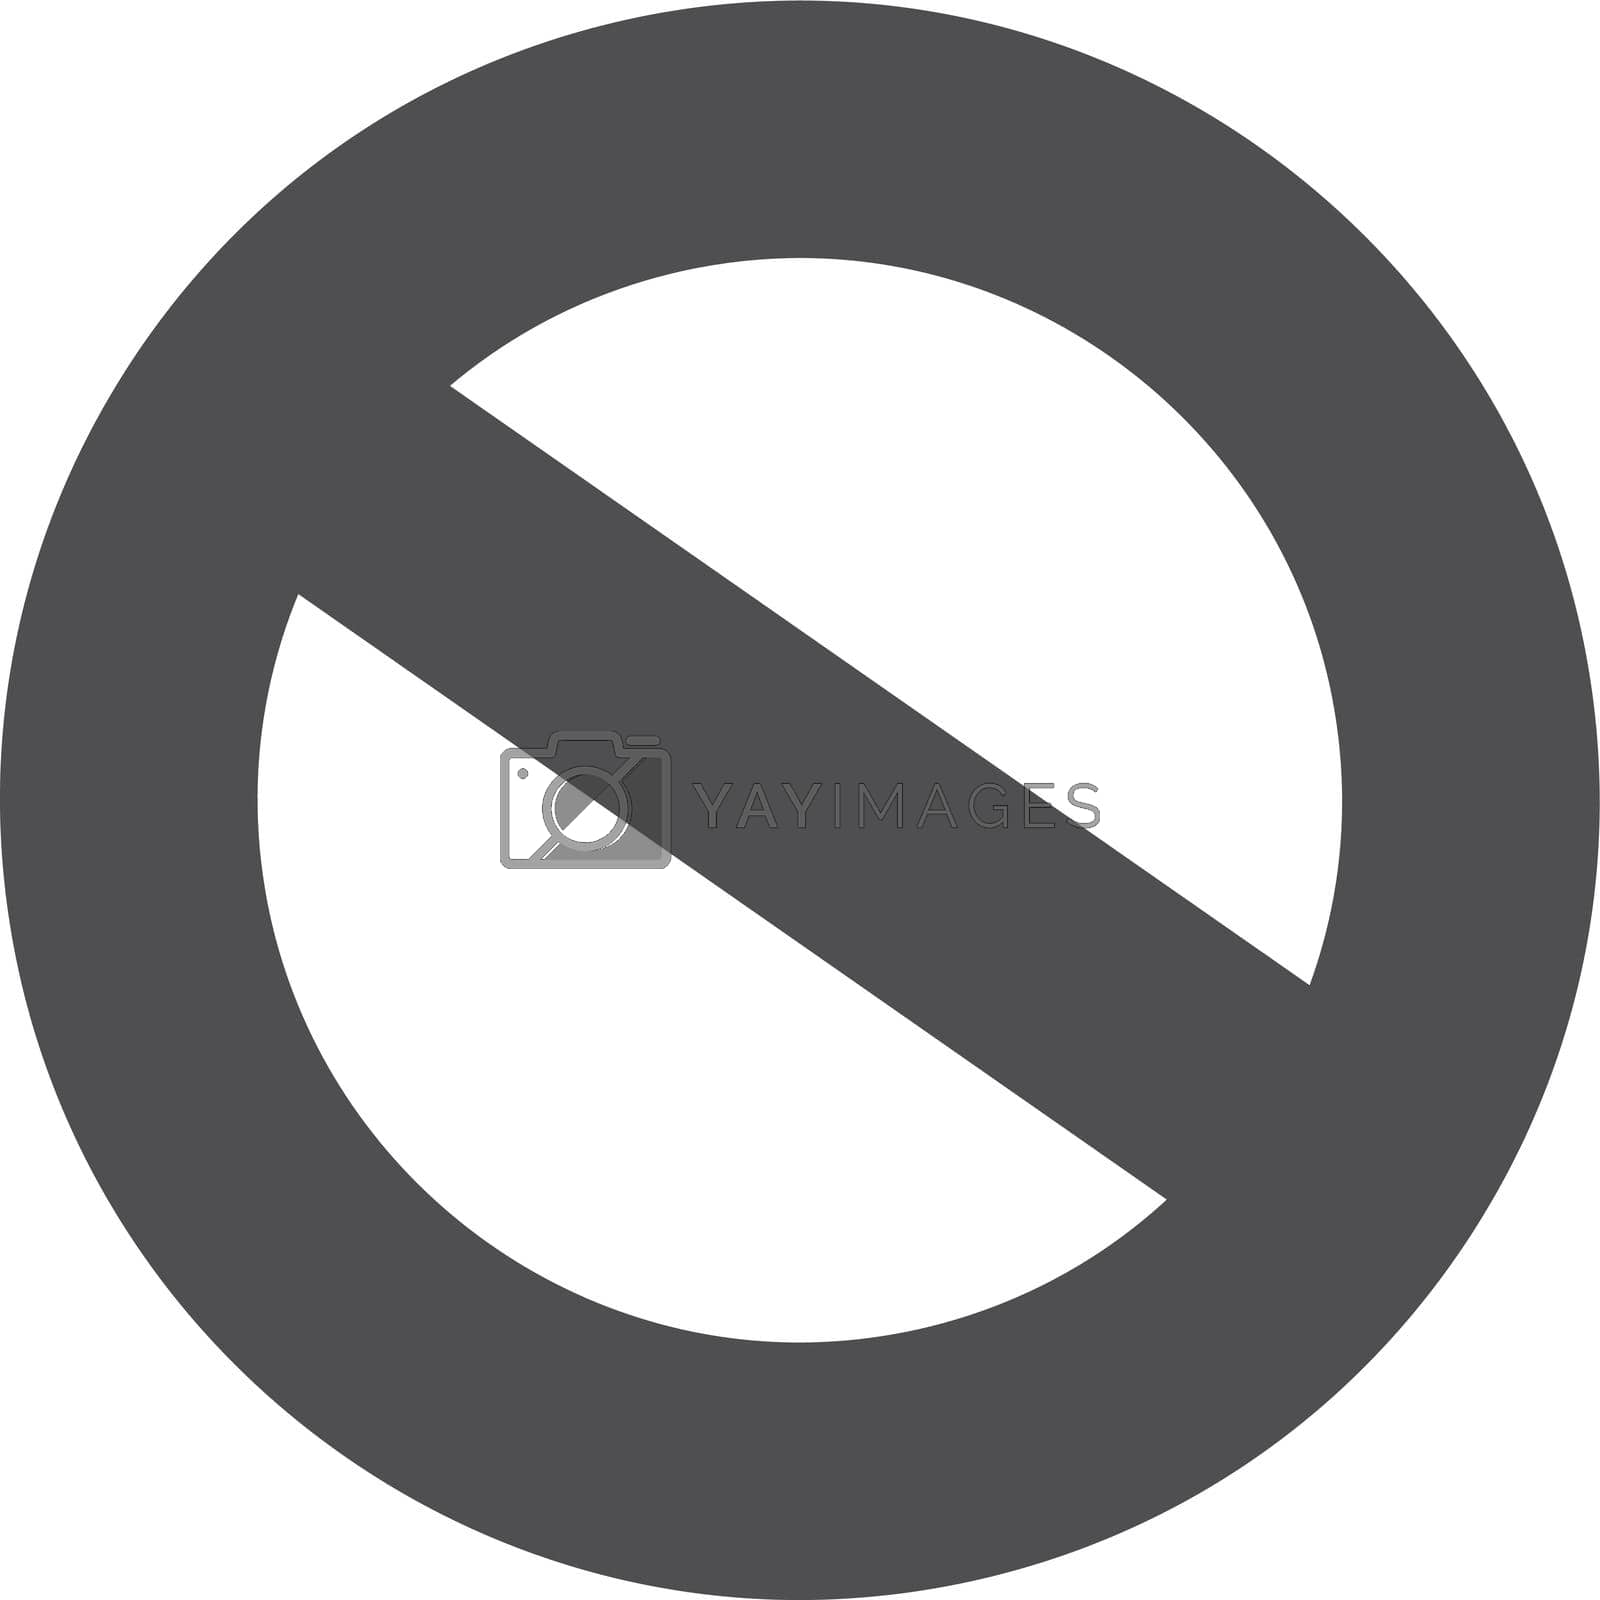 Royalty free image of Forbidden icon. Restriction black symbol. Access deny sign by MicroOne